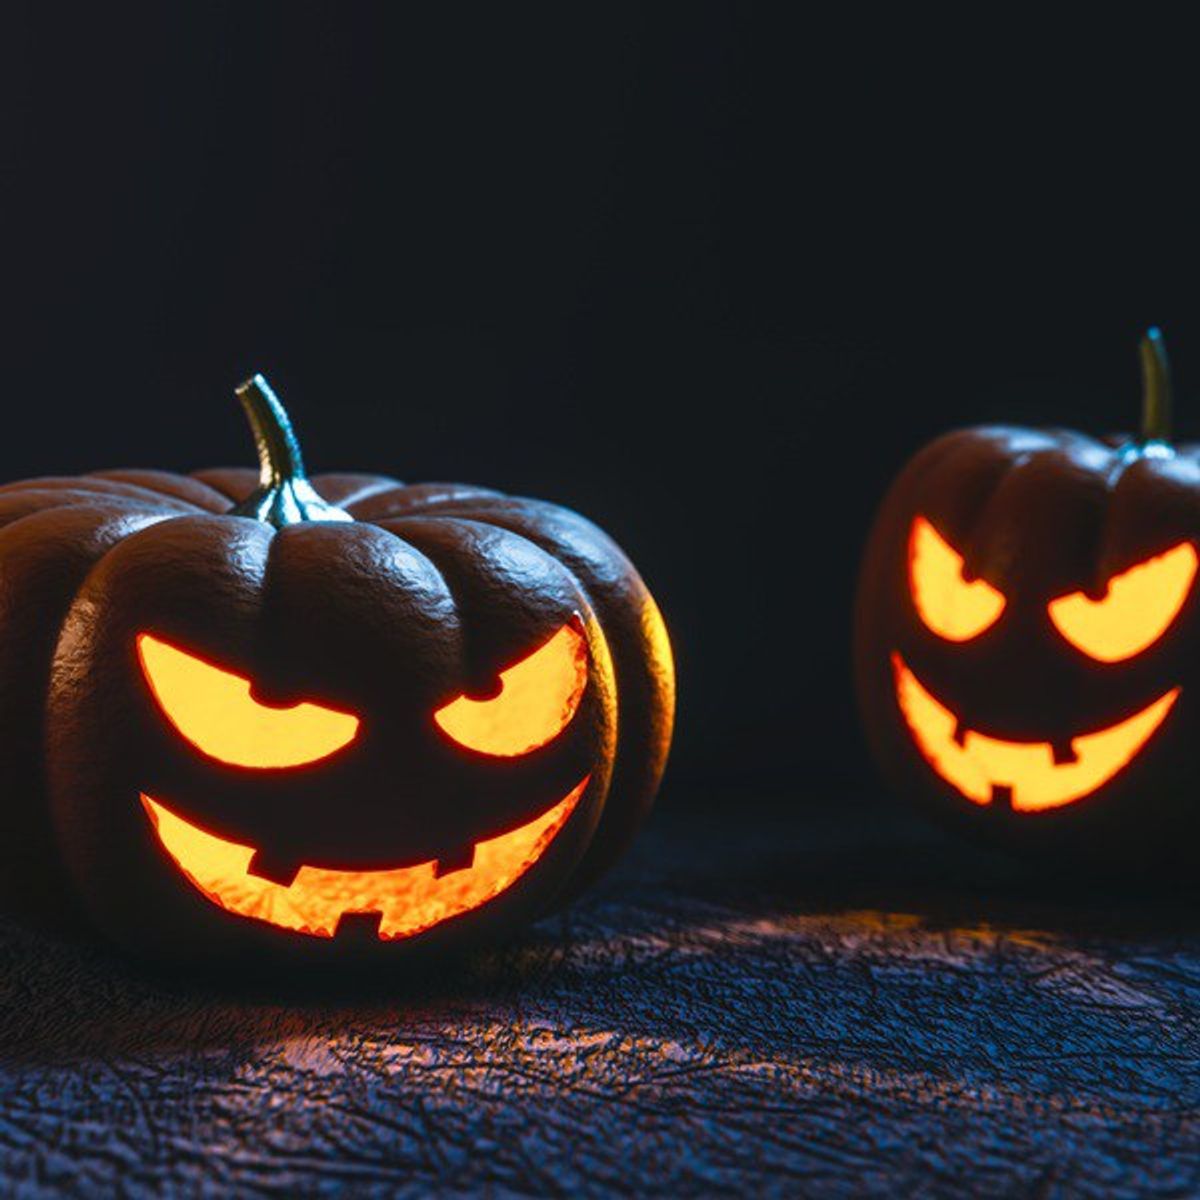 6 Reasons College Students should go Trick or Treating